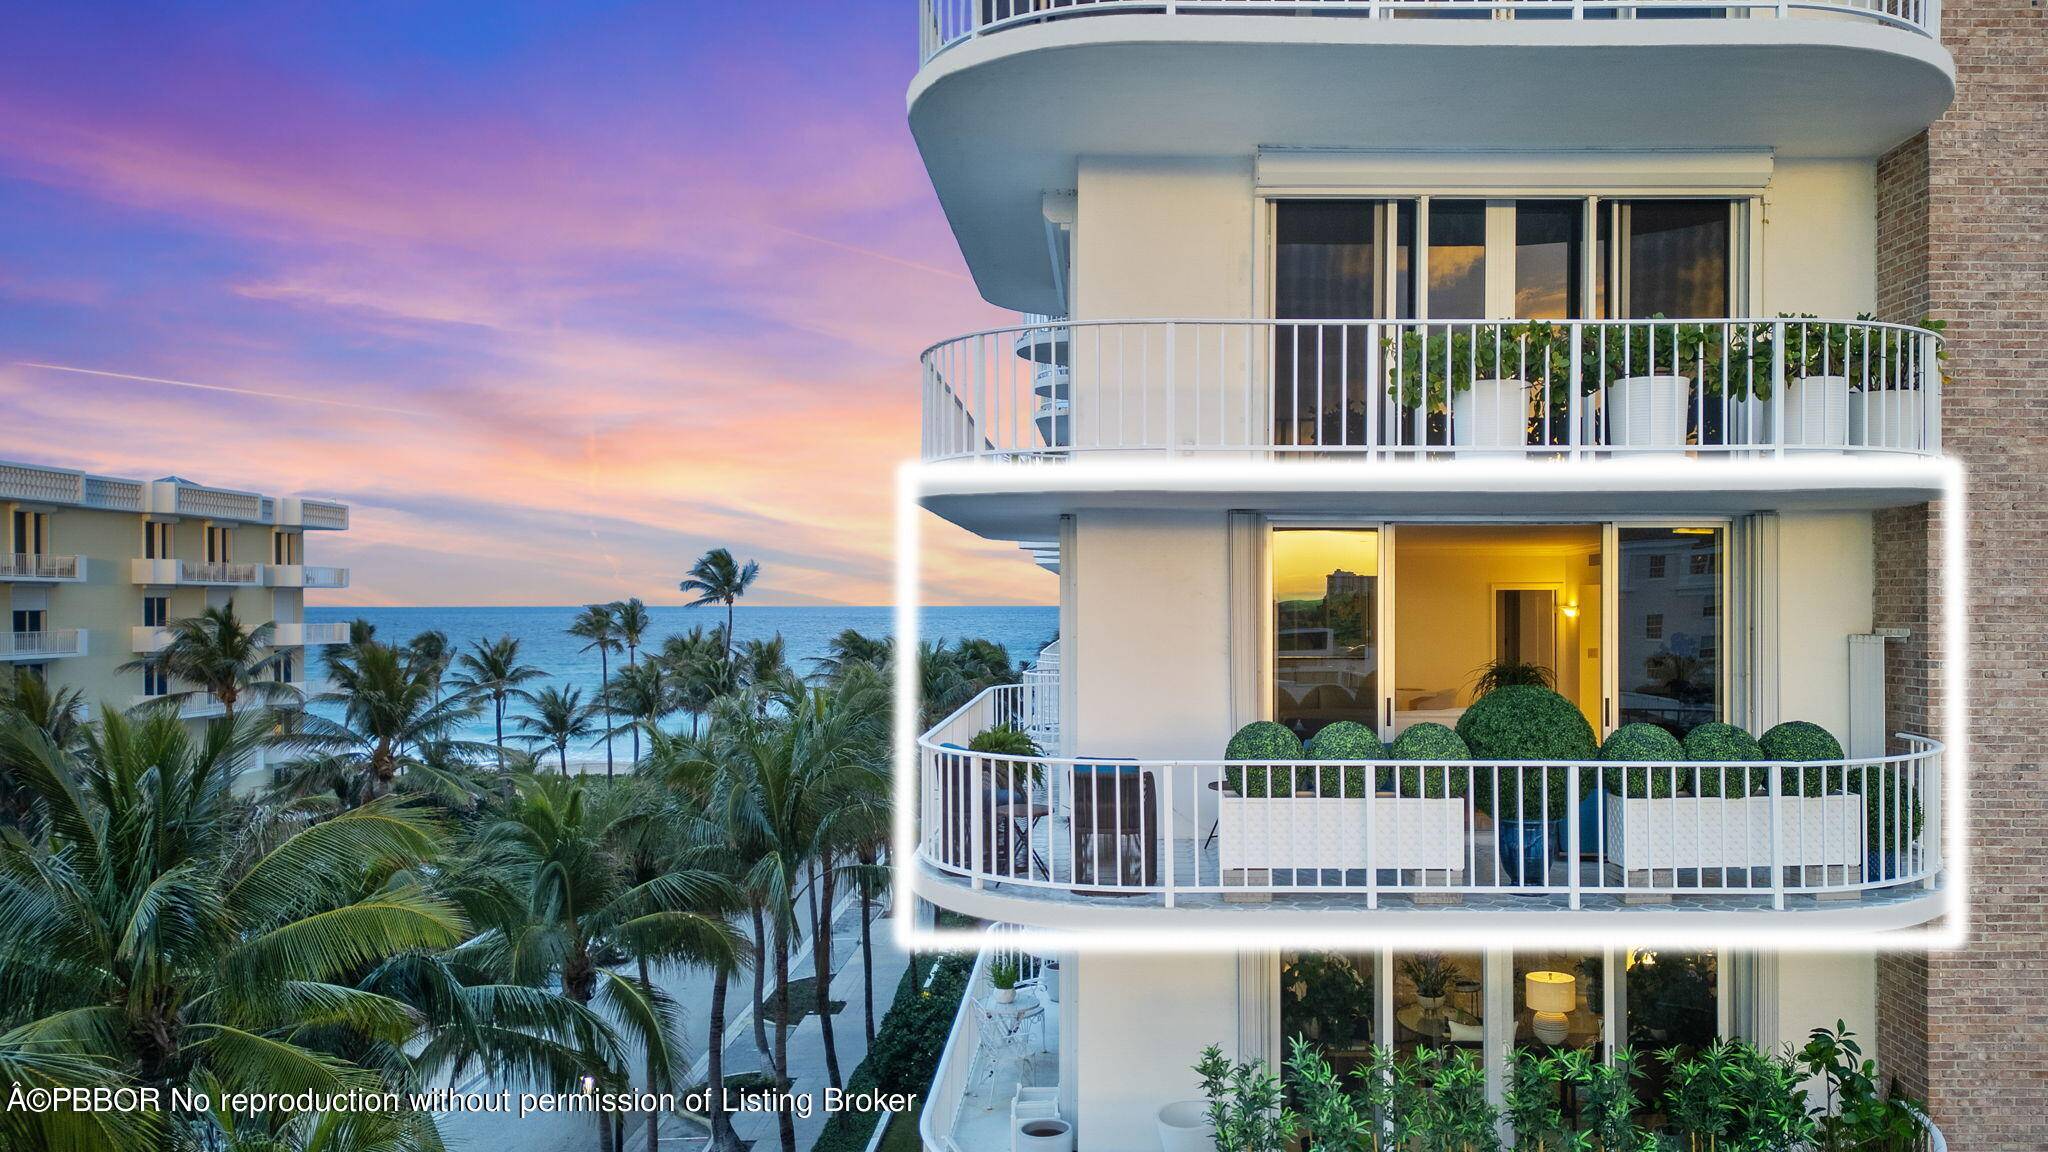 Ocean views and skyline sunsets from the terraces of one of Palm Beach's most sought after buildings.